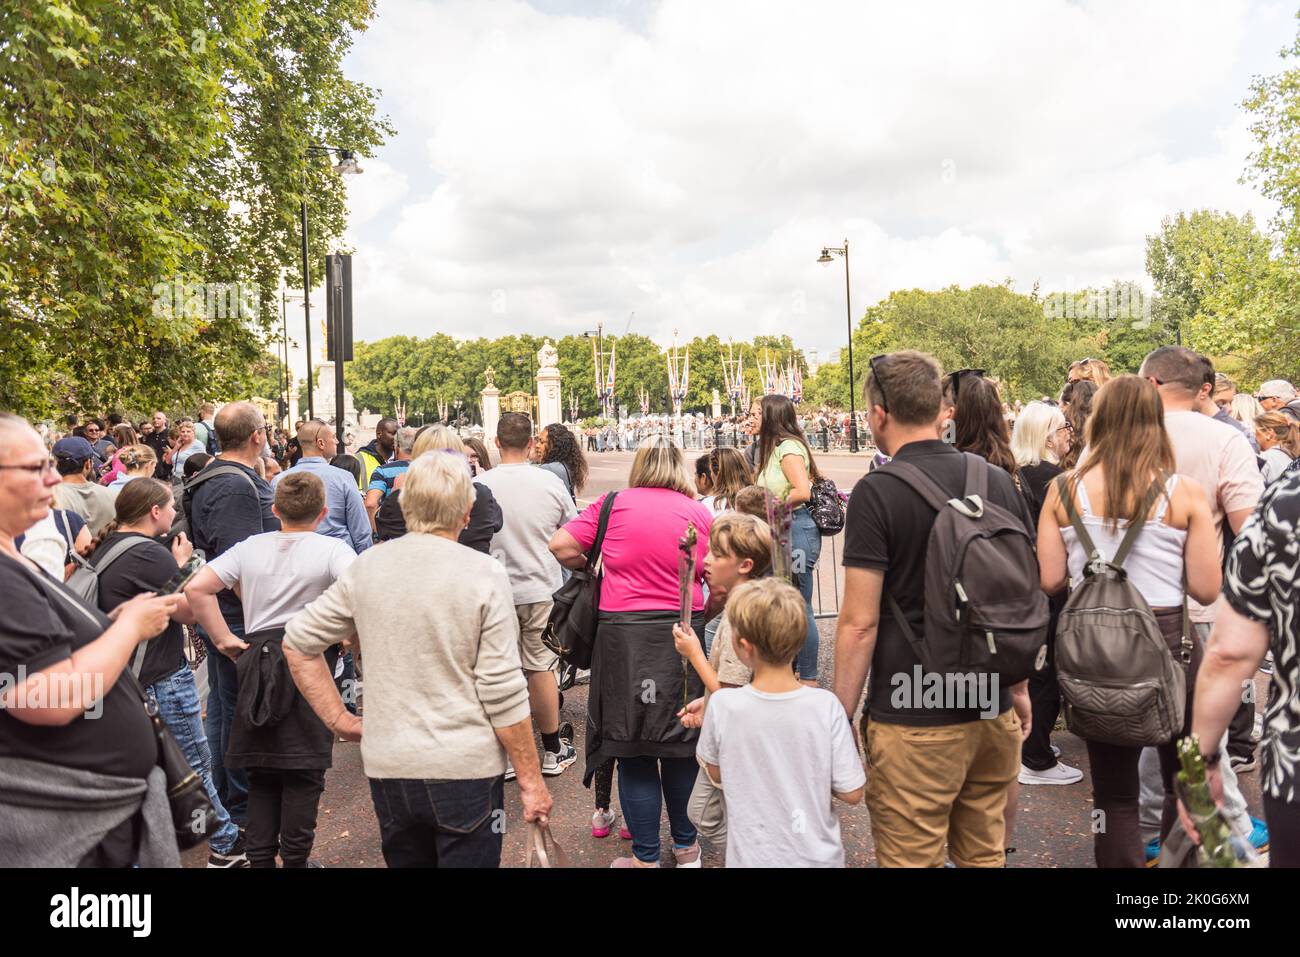 Large crowds in London Buckingham Palace and nearby parks Stock Photo